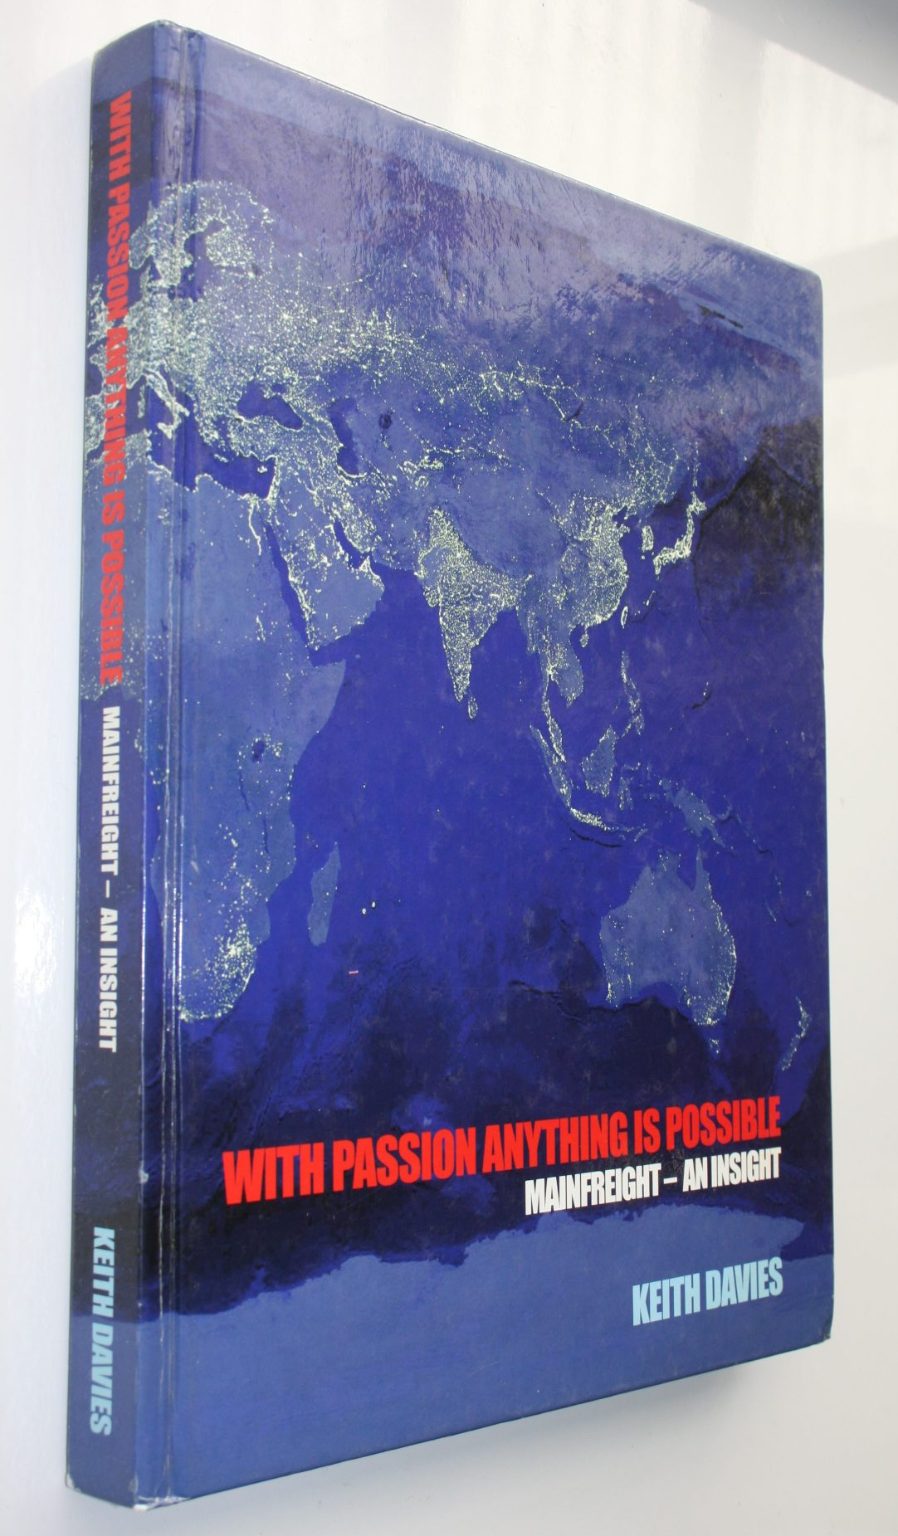 With Passion Anything is Possible MainFreight An Insight By Keith Davies. SIGNED by Don Braid on half-title page.